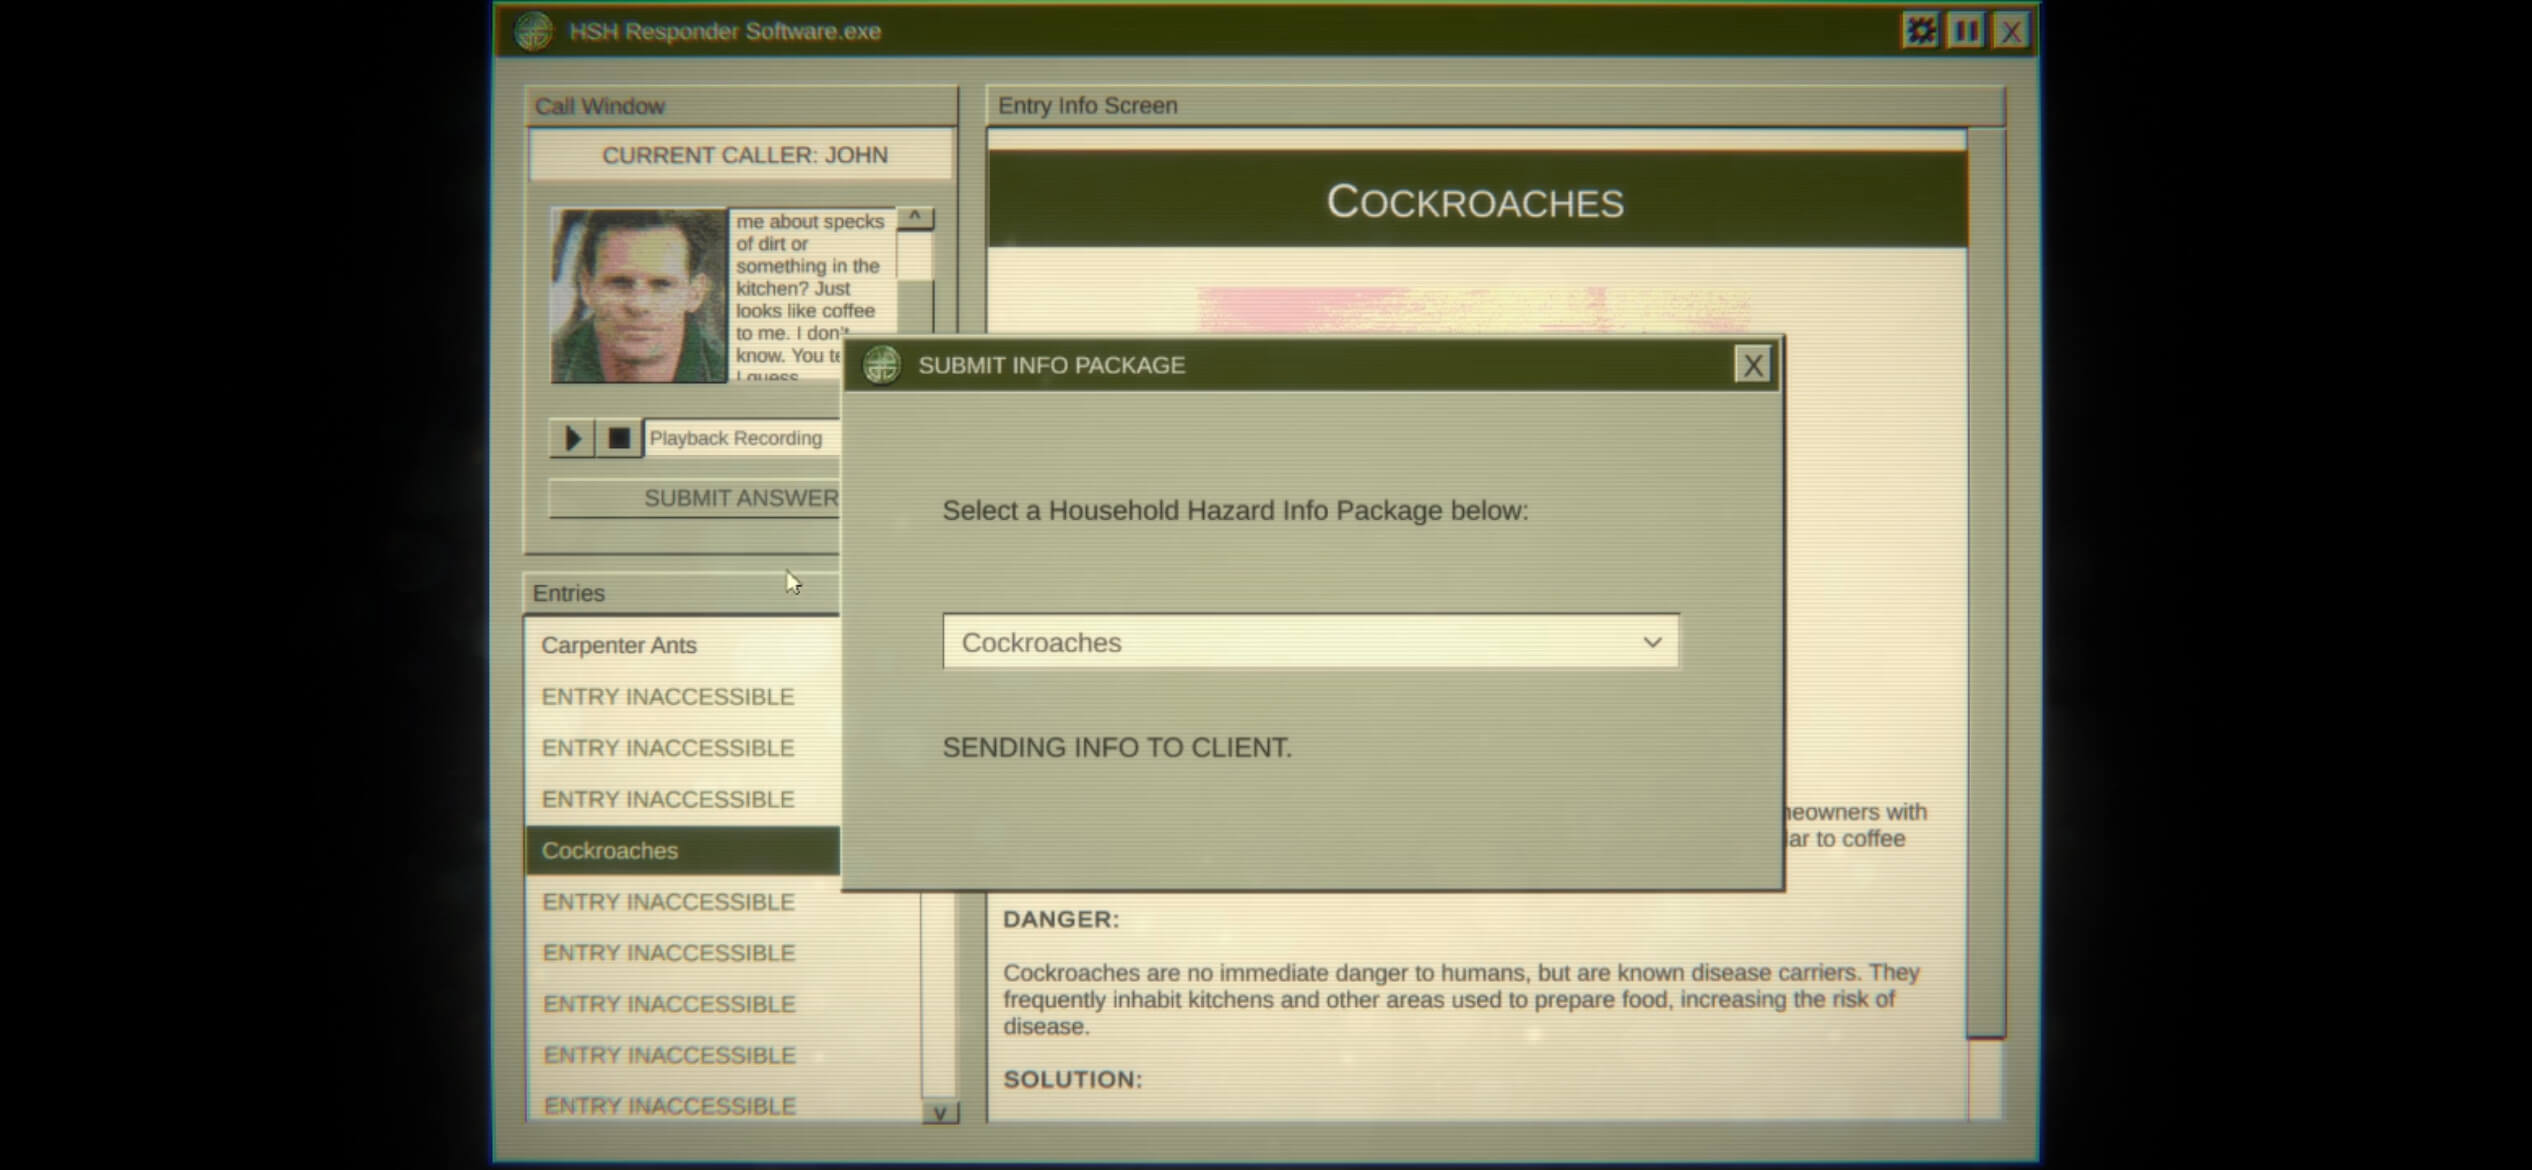 A screen showing the answer menu, the reviewer has selected the answer cockroaches for the callers problem.